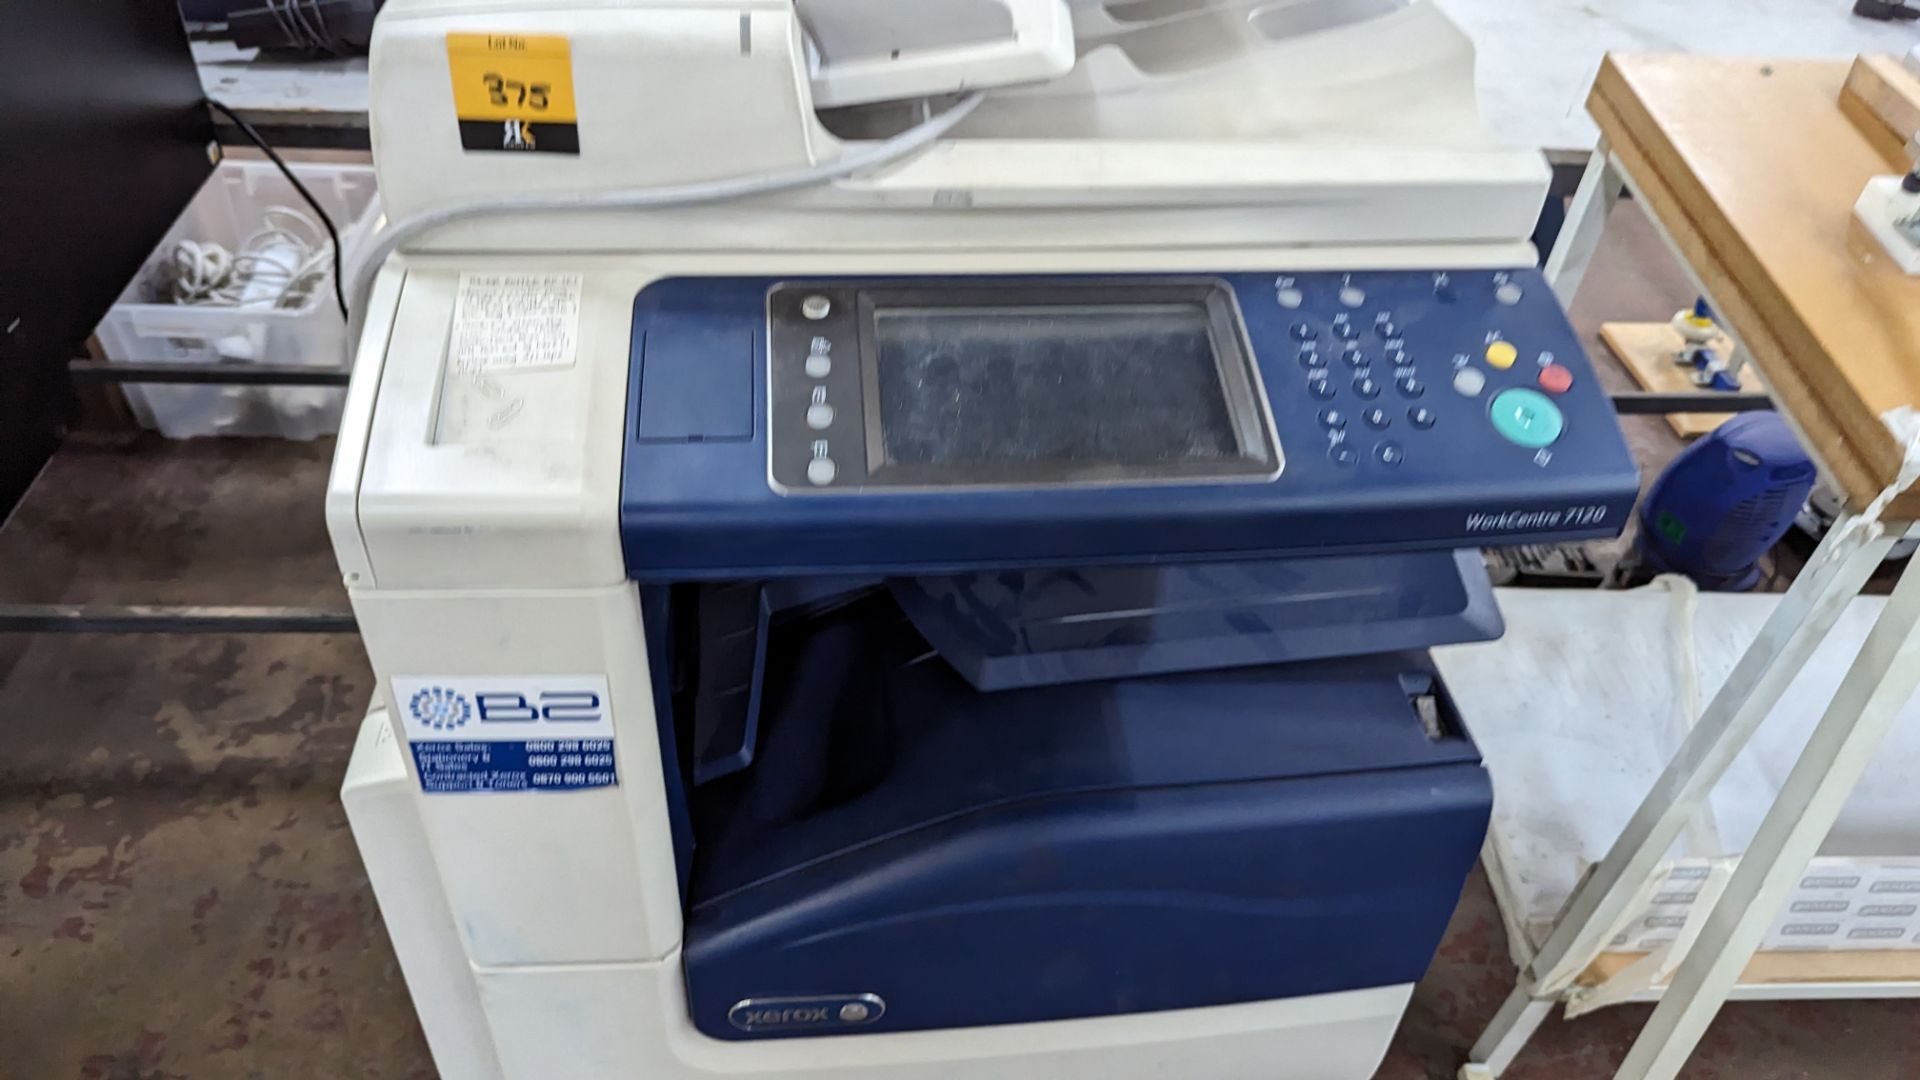 Xerox WorkCentre 7120 floor standing multifunction copier with 4 paper cassettes, auto document feed - Image 6 of 11